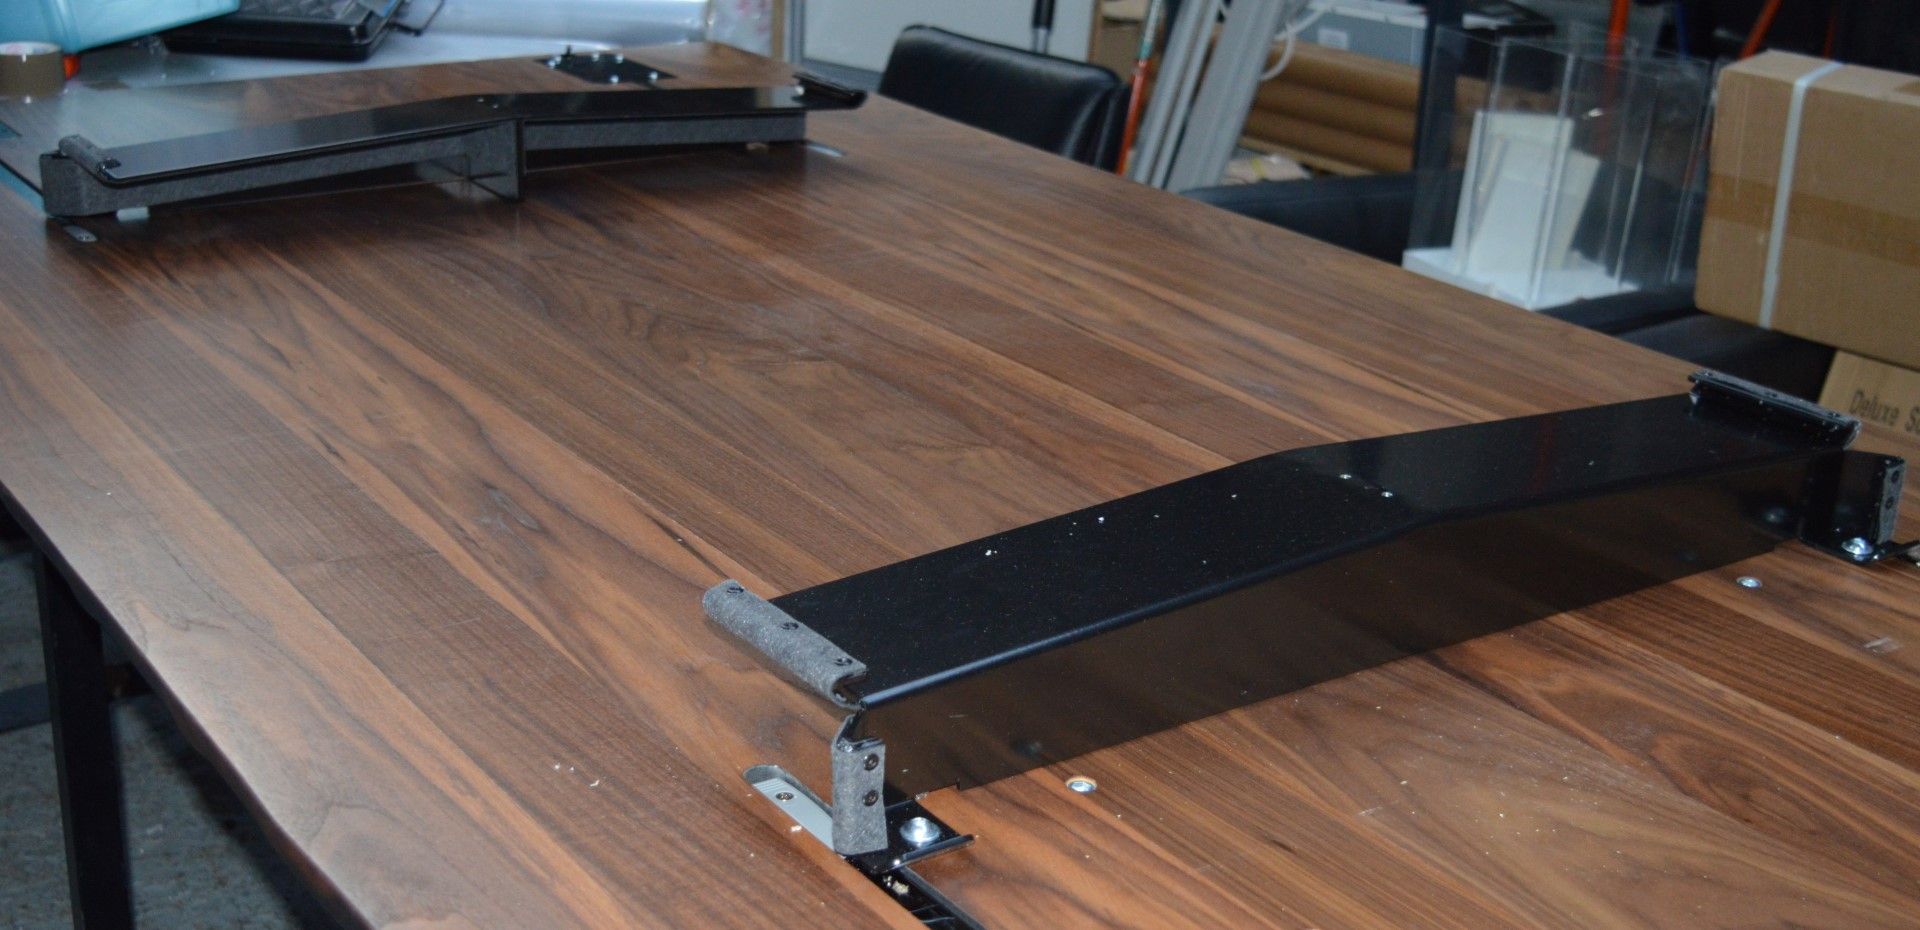 1 x Cattelan Ikon Drive Table Top - Base Not Included - 240x120cm - Ref: 3511316 - CL087 - Location: - Image 8 of 27